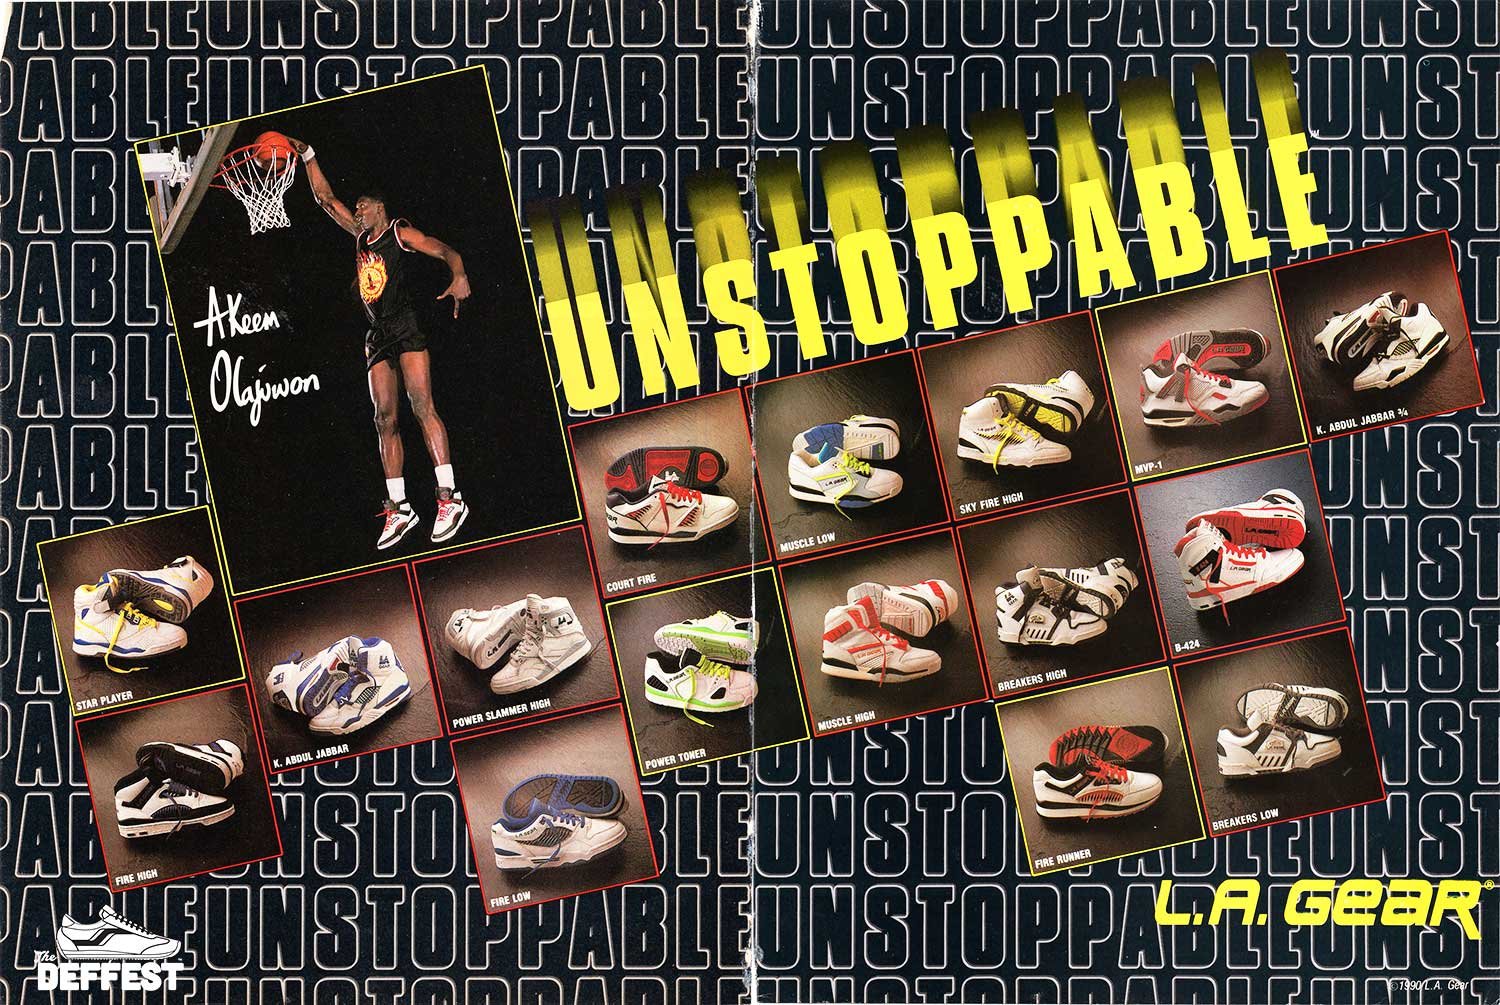 The Deffest®. A vintage and retro sneaker blog. — Hoop Stars: LA Gear 1990 Akeem  Olajuwon 'Unstoppable' Basketball Shoes Vintage High Top Sneakers